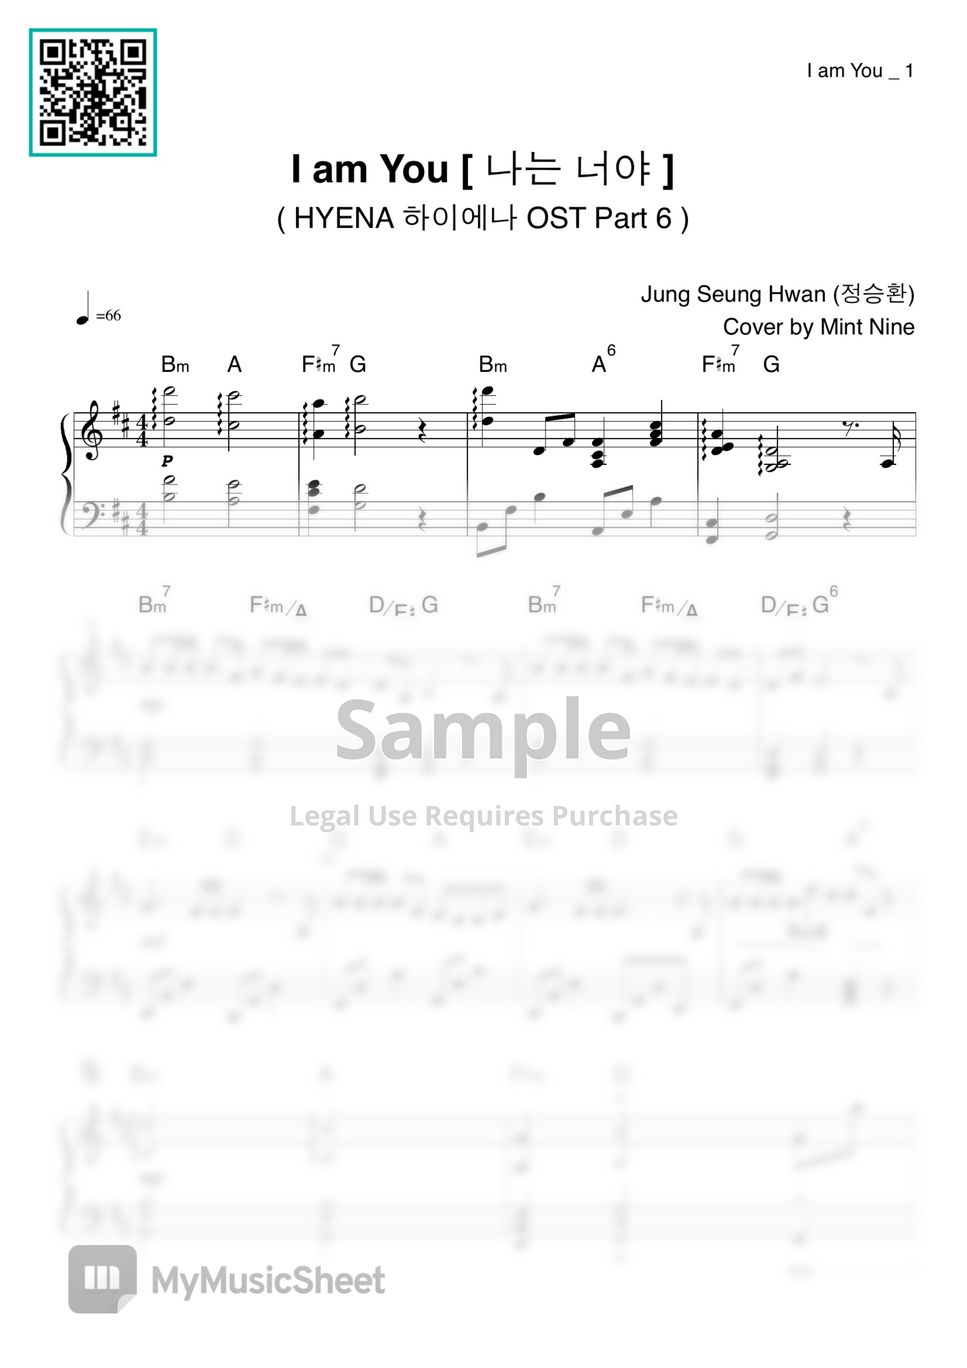 Jung Seung Hwan | HYENA OST - I am You by MInt Nine